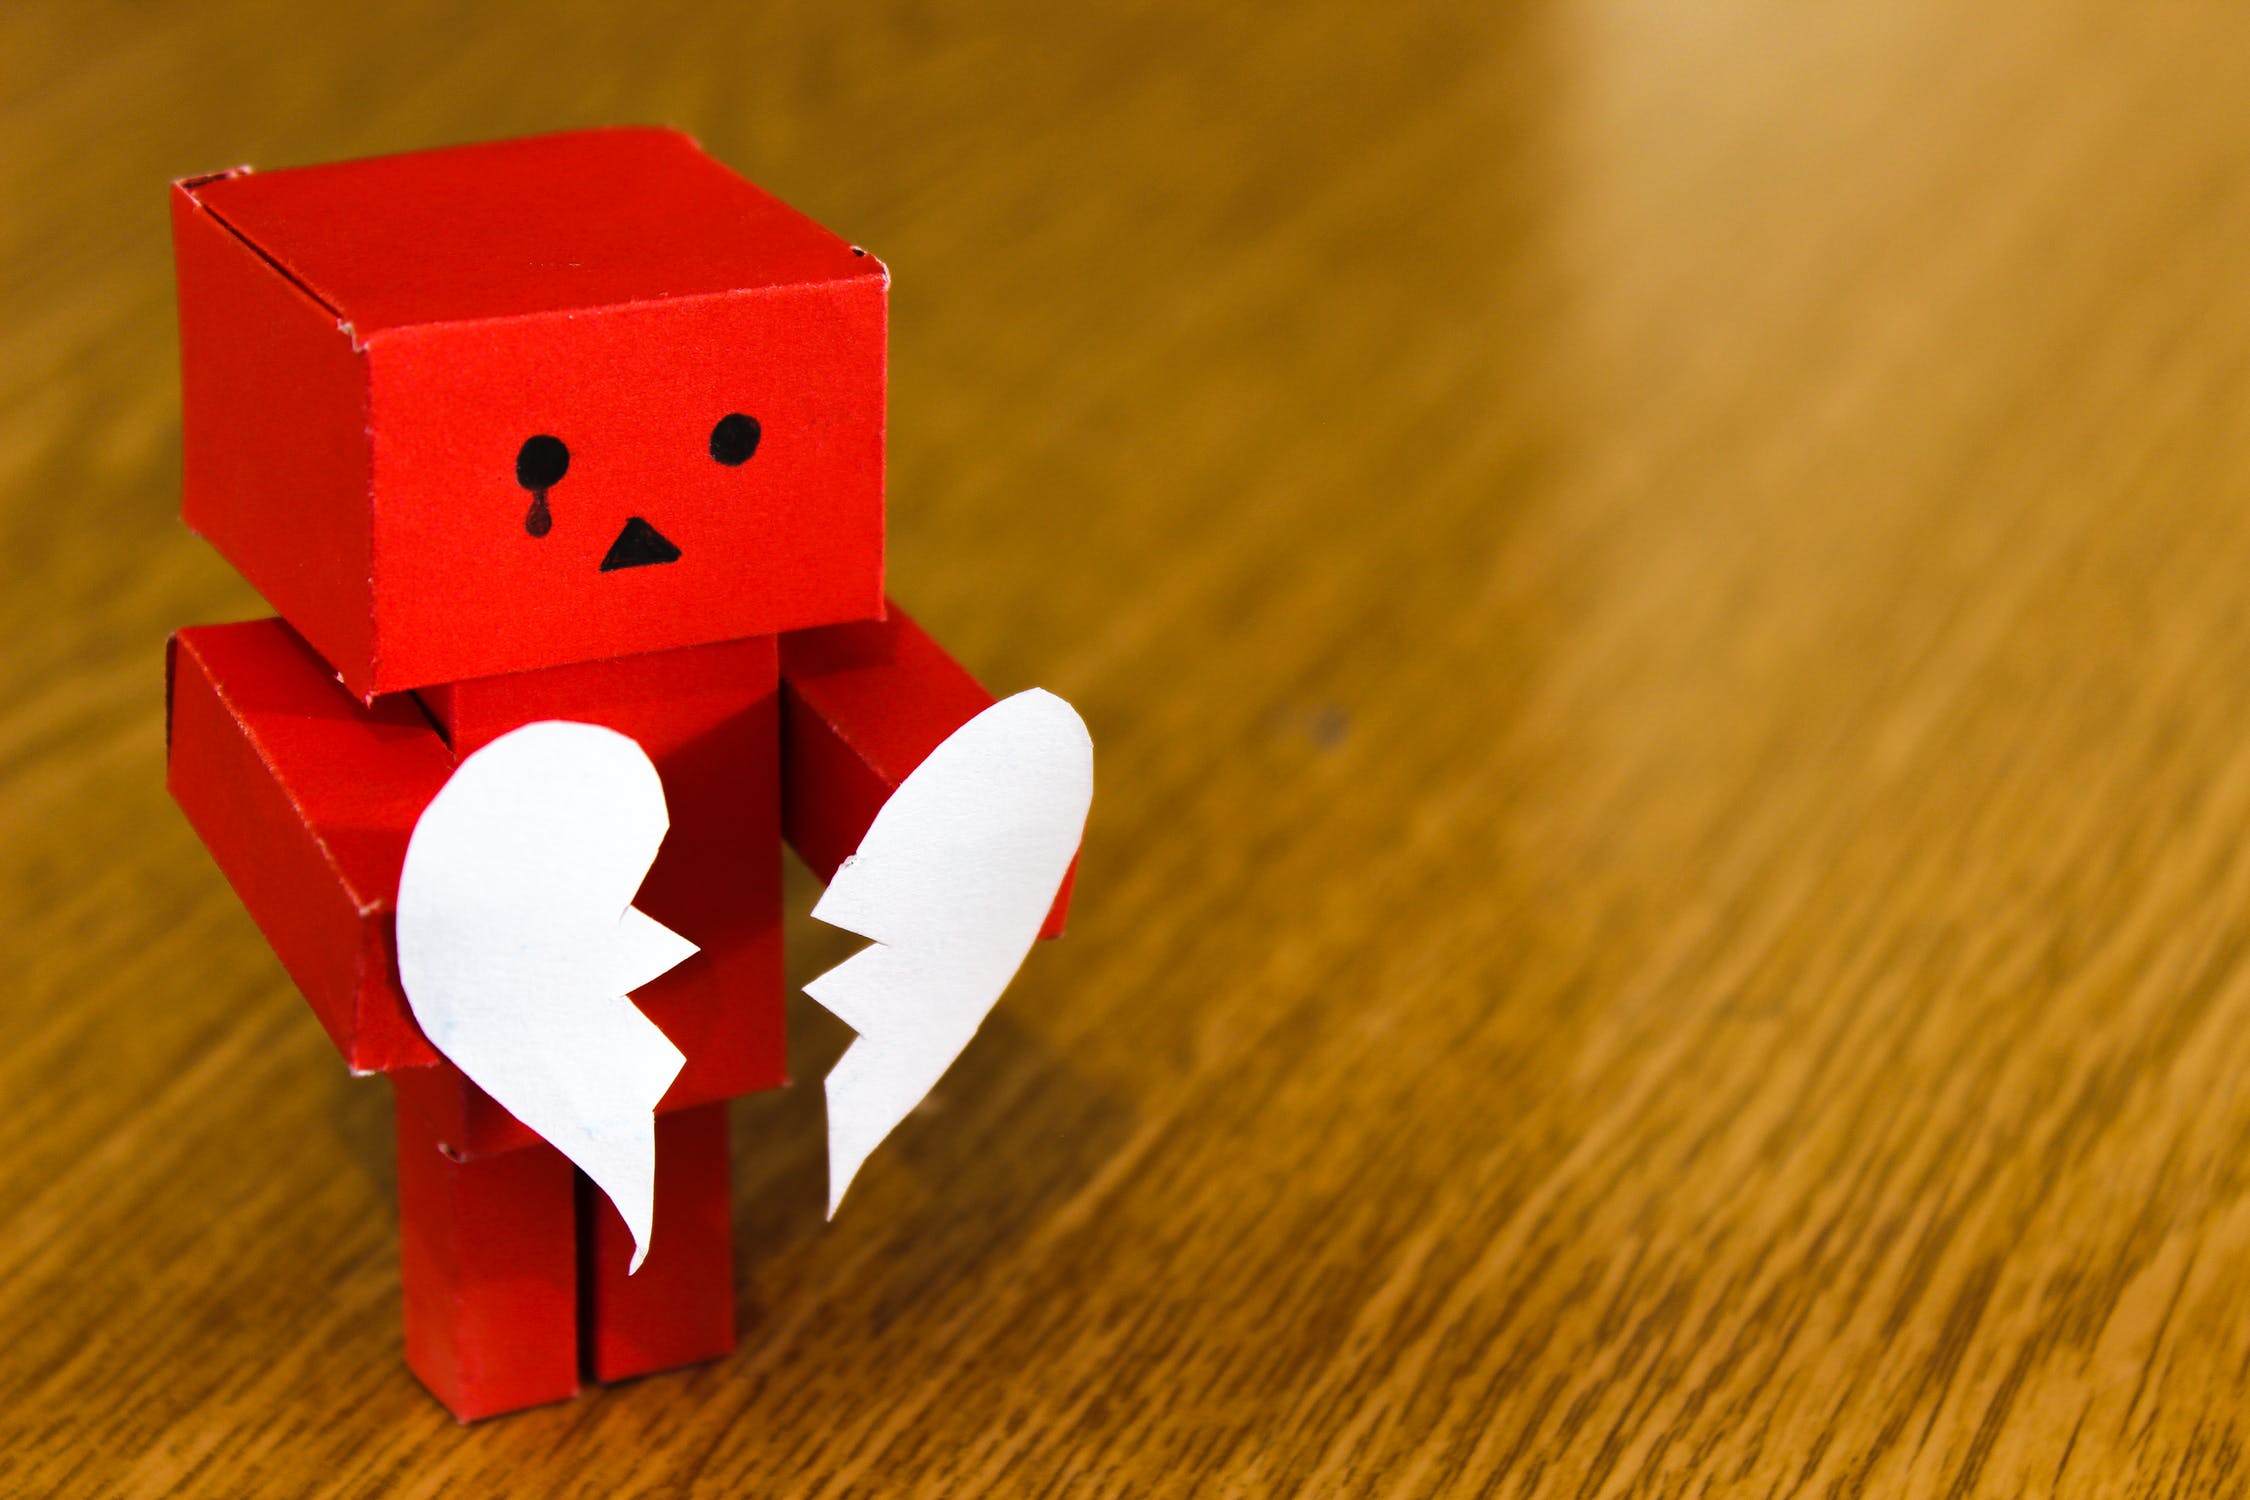 Dealing with divorce - How to part ways properly according to the Law